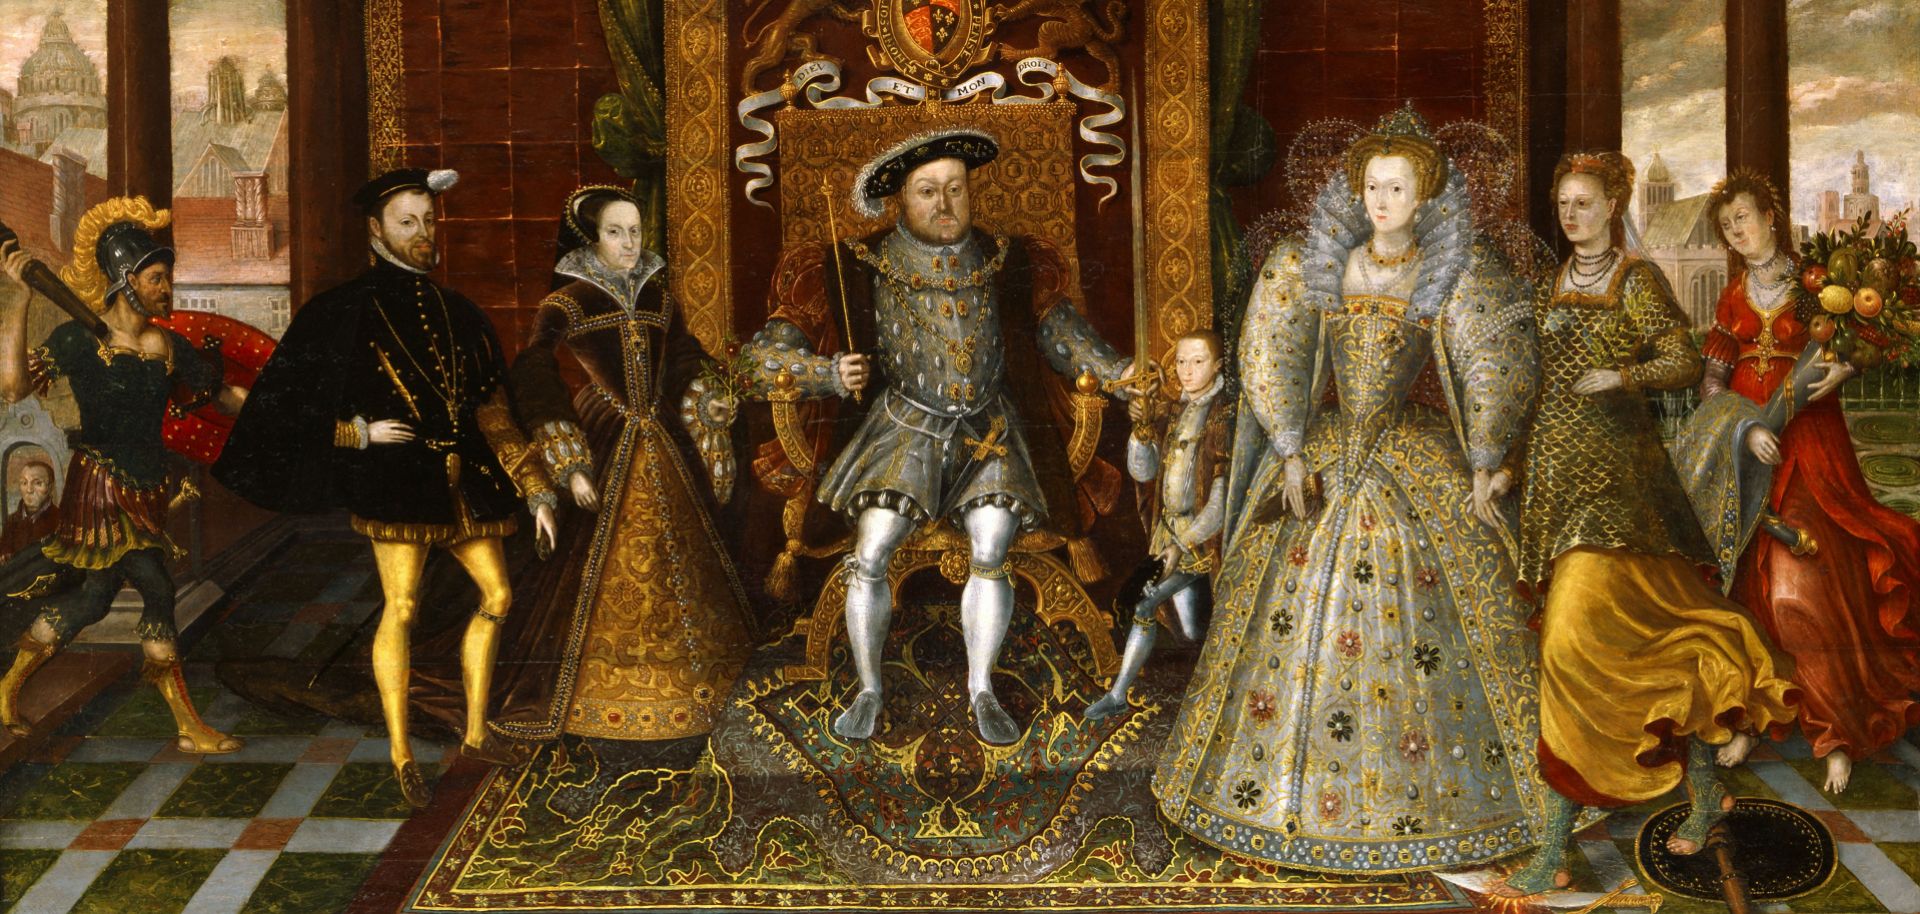 A photograph of "The Family of Henry VIII: An Allegory of the Tudor Succession," a 16th century painting attributed to Lucas de Heere.